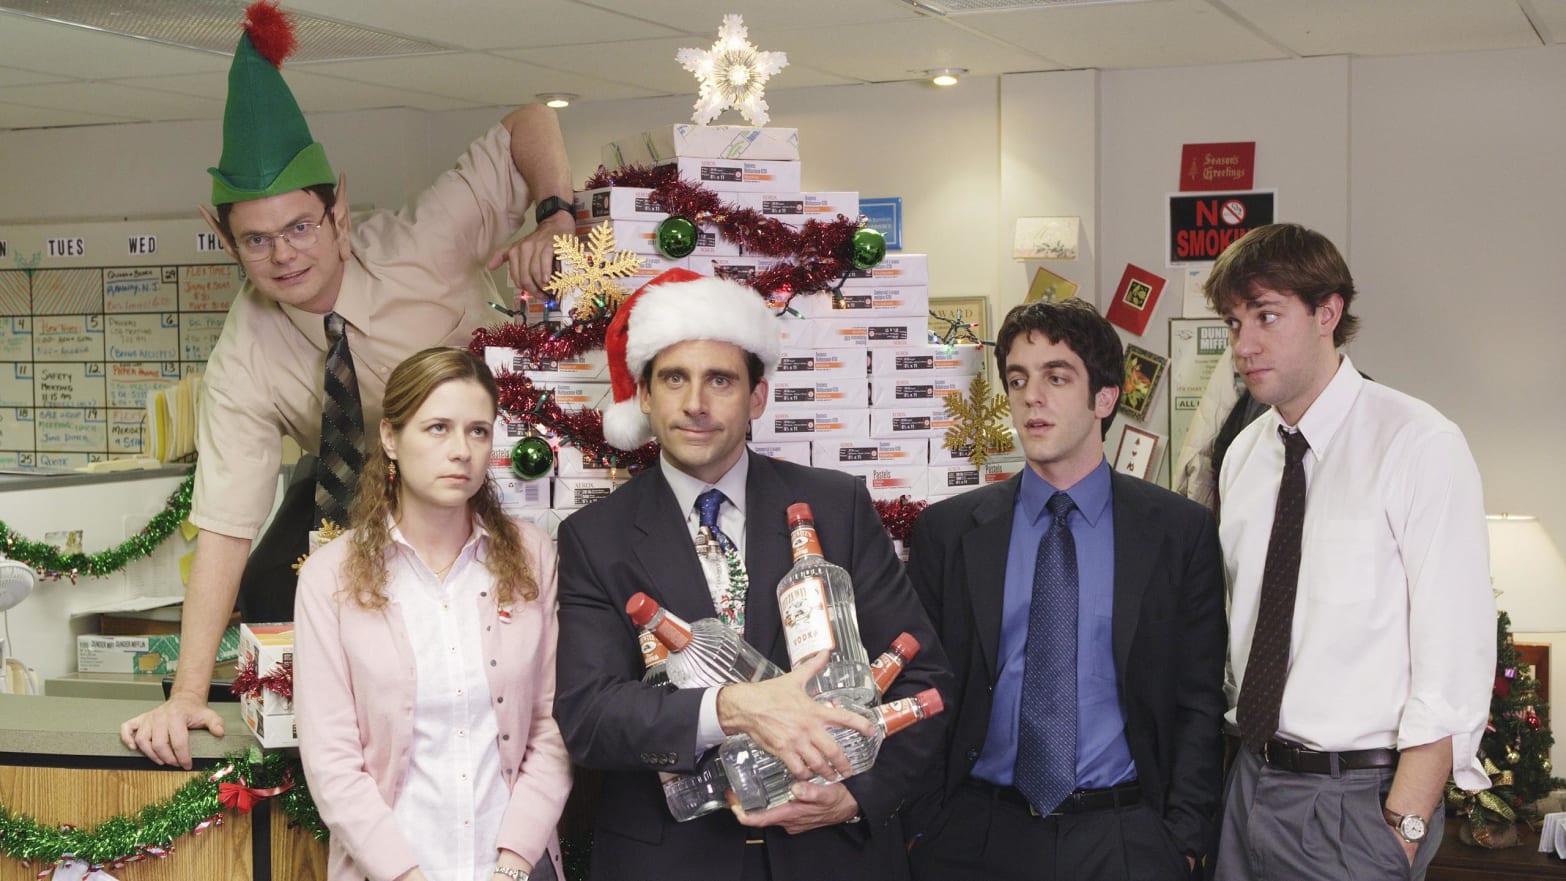 Is 'The Office' the Most Popular Show on Netflix?